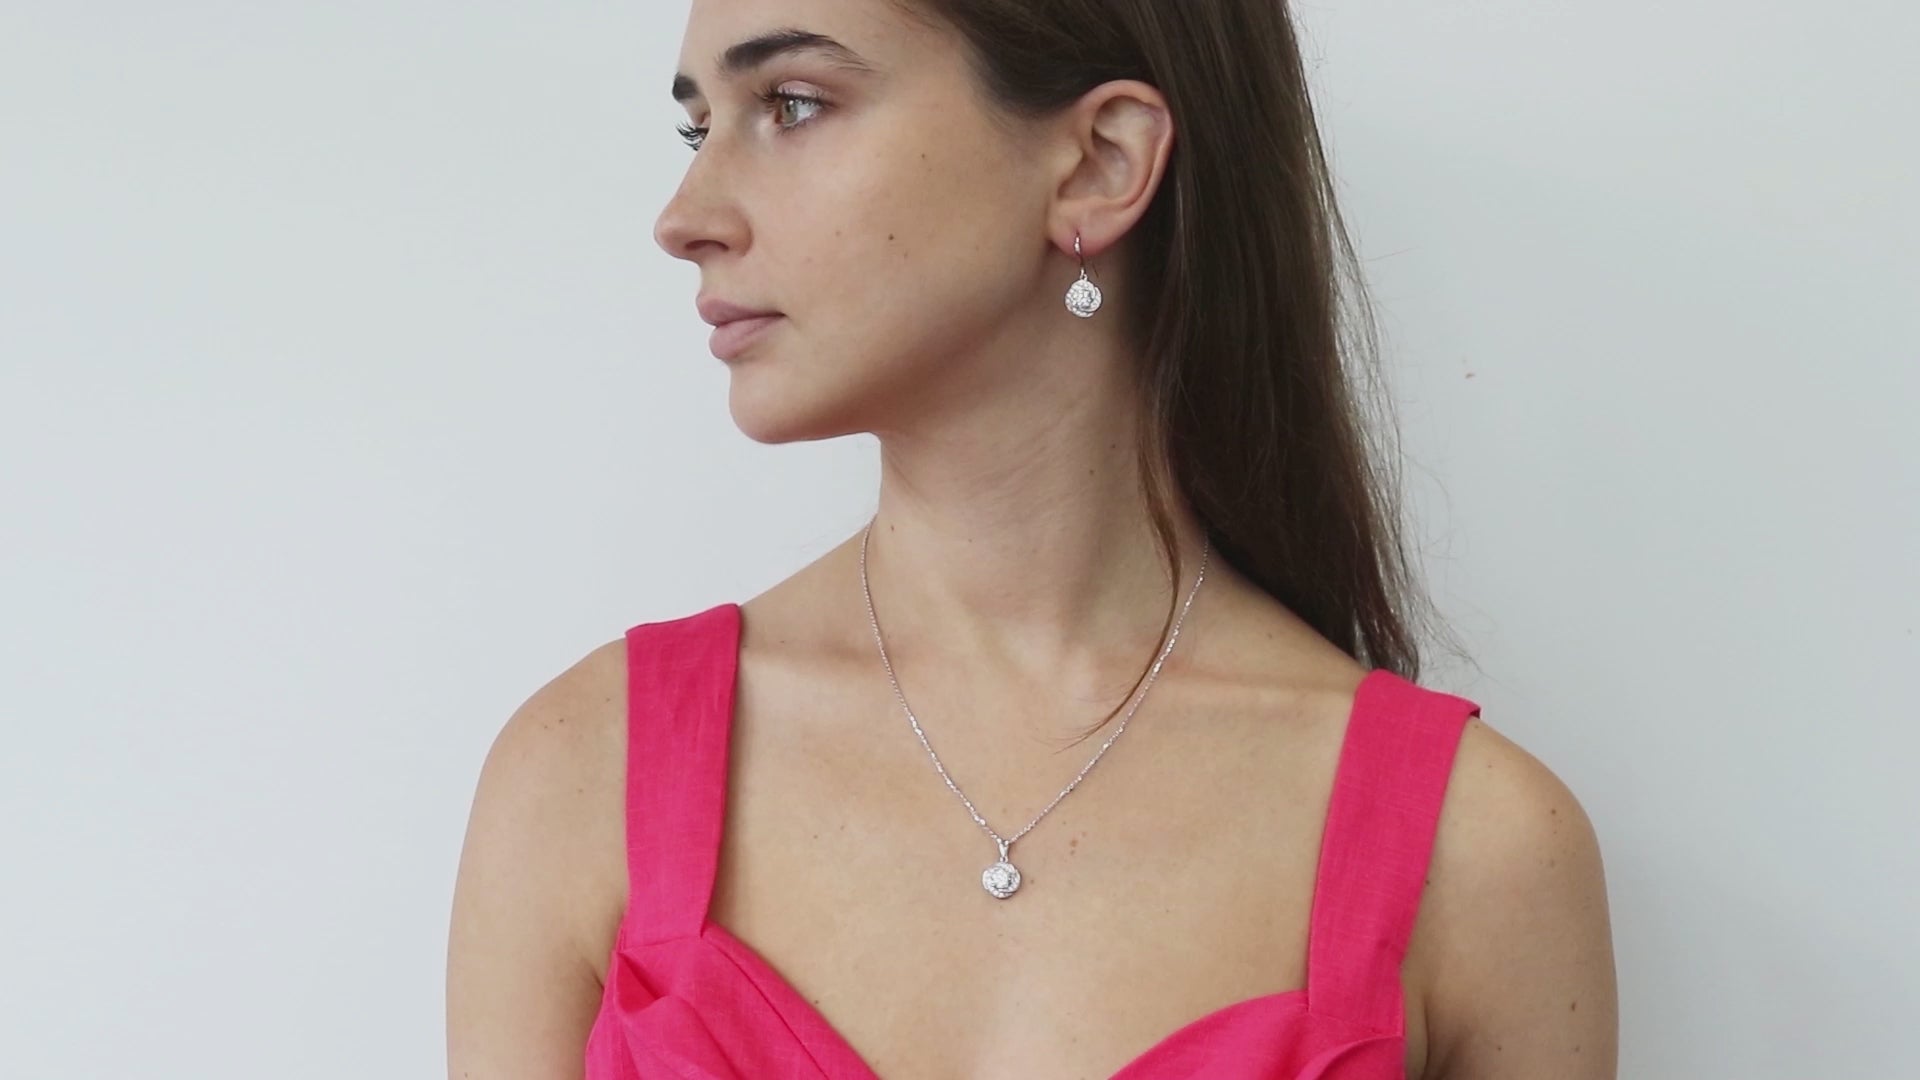 Video Contains Flower Woven CZ Fish Hook Dangle Earrings in Sterling Silver. Style Number E1796-01